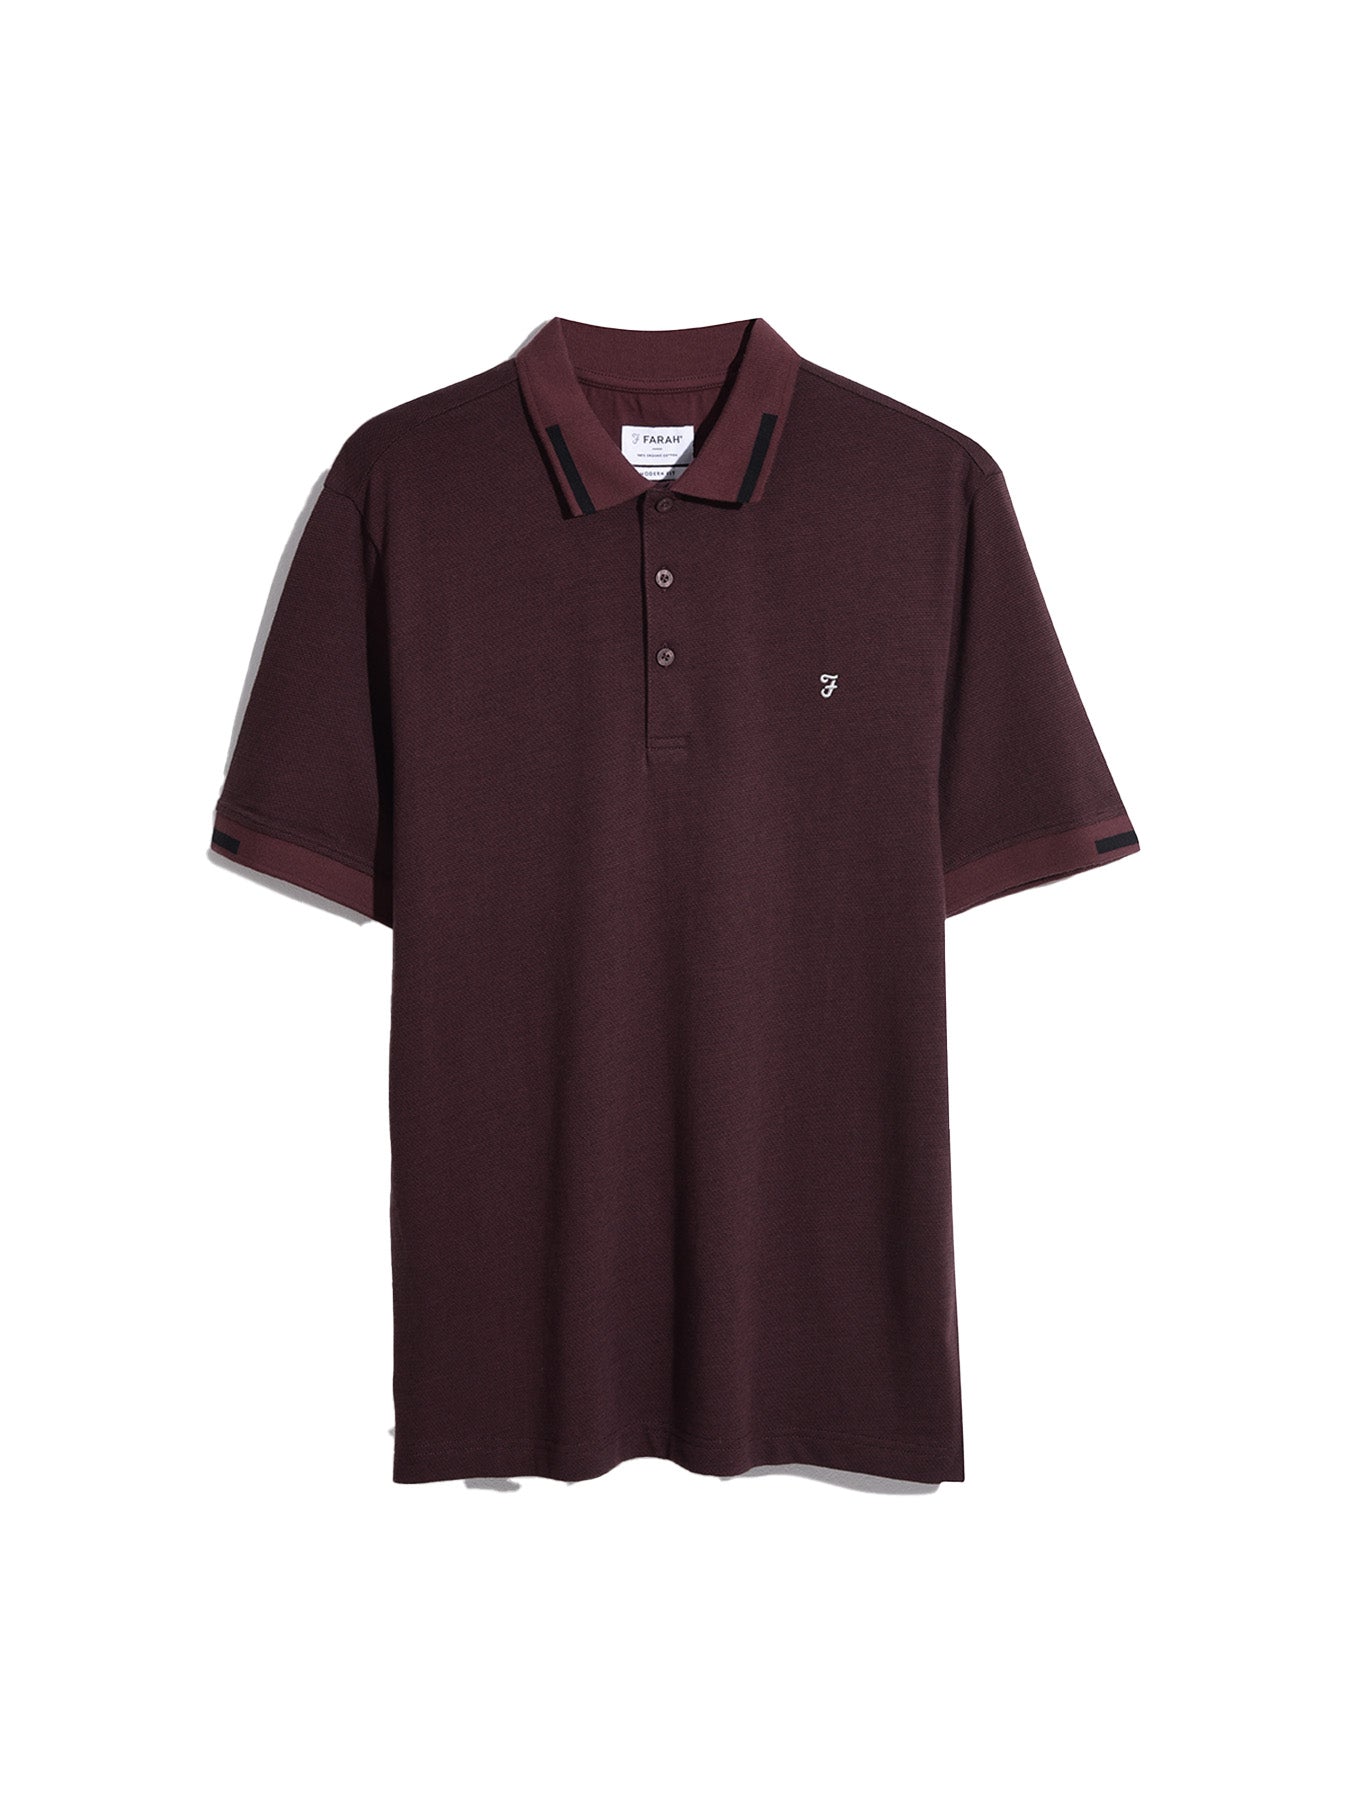 View Lonnie Jaquard Short Sleeve Polo Shirt In Archive Burgundy information